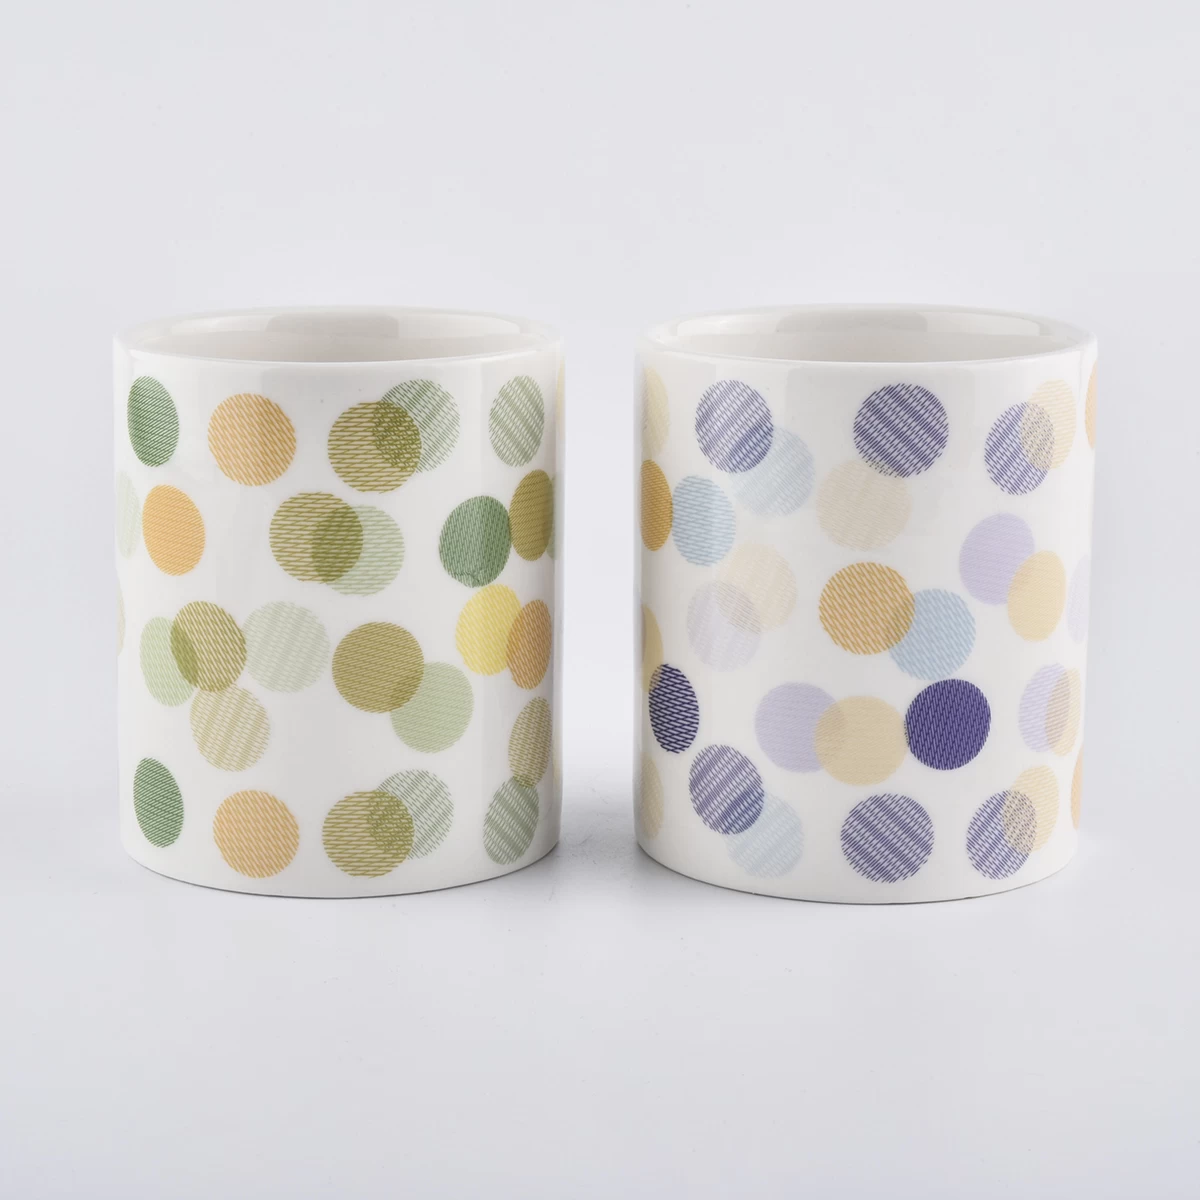 ceramic candle holders with printing for Spring